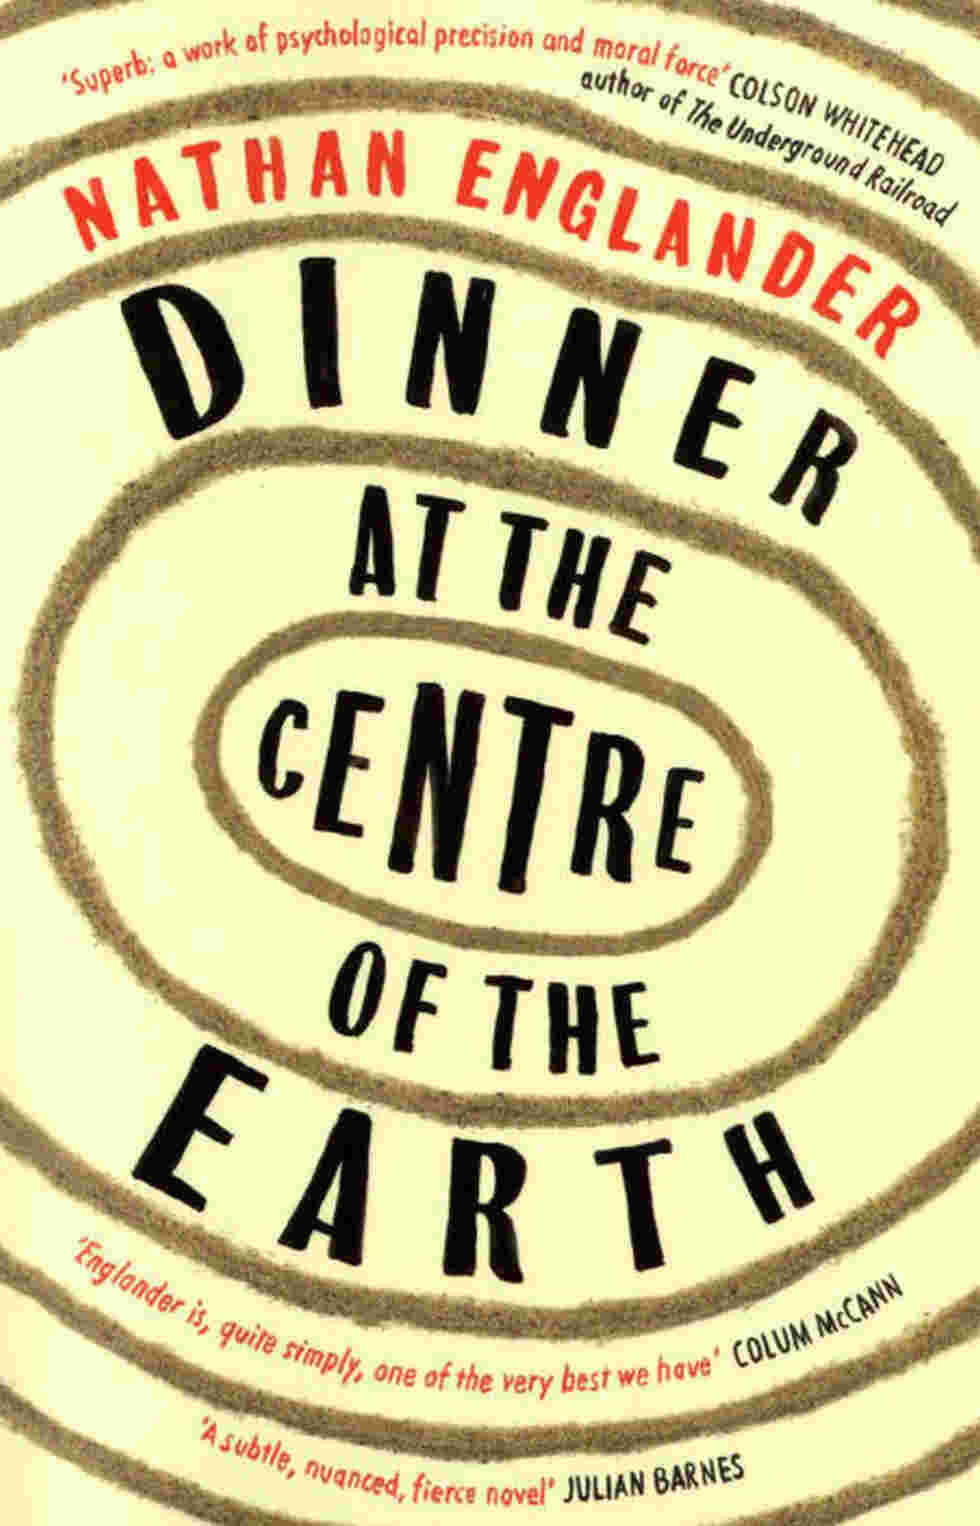 Dinner at the center of the earth